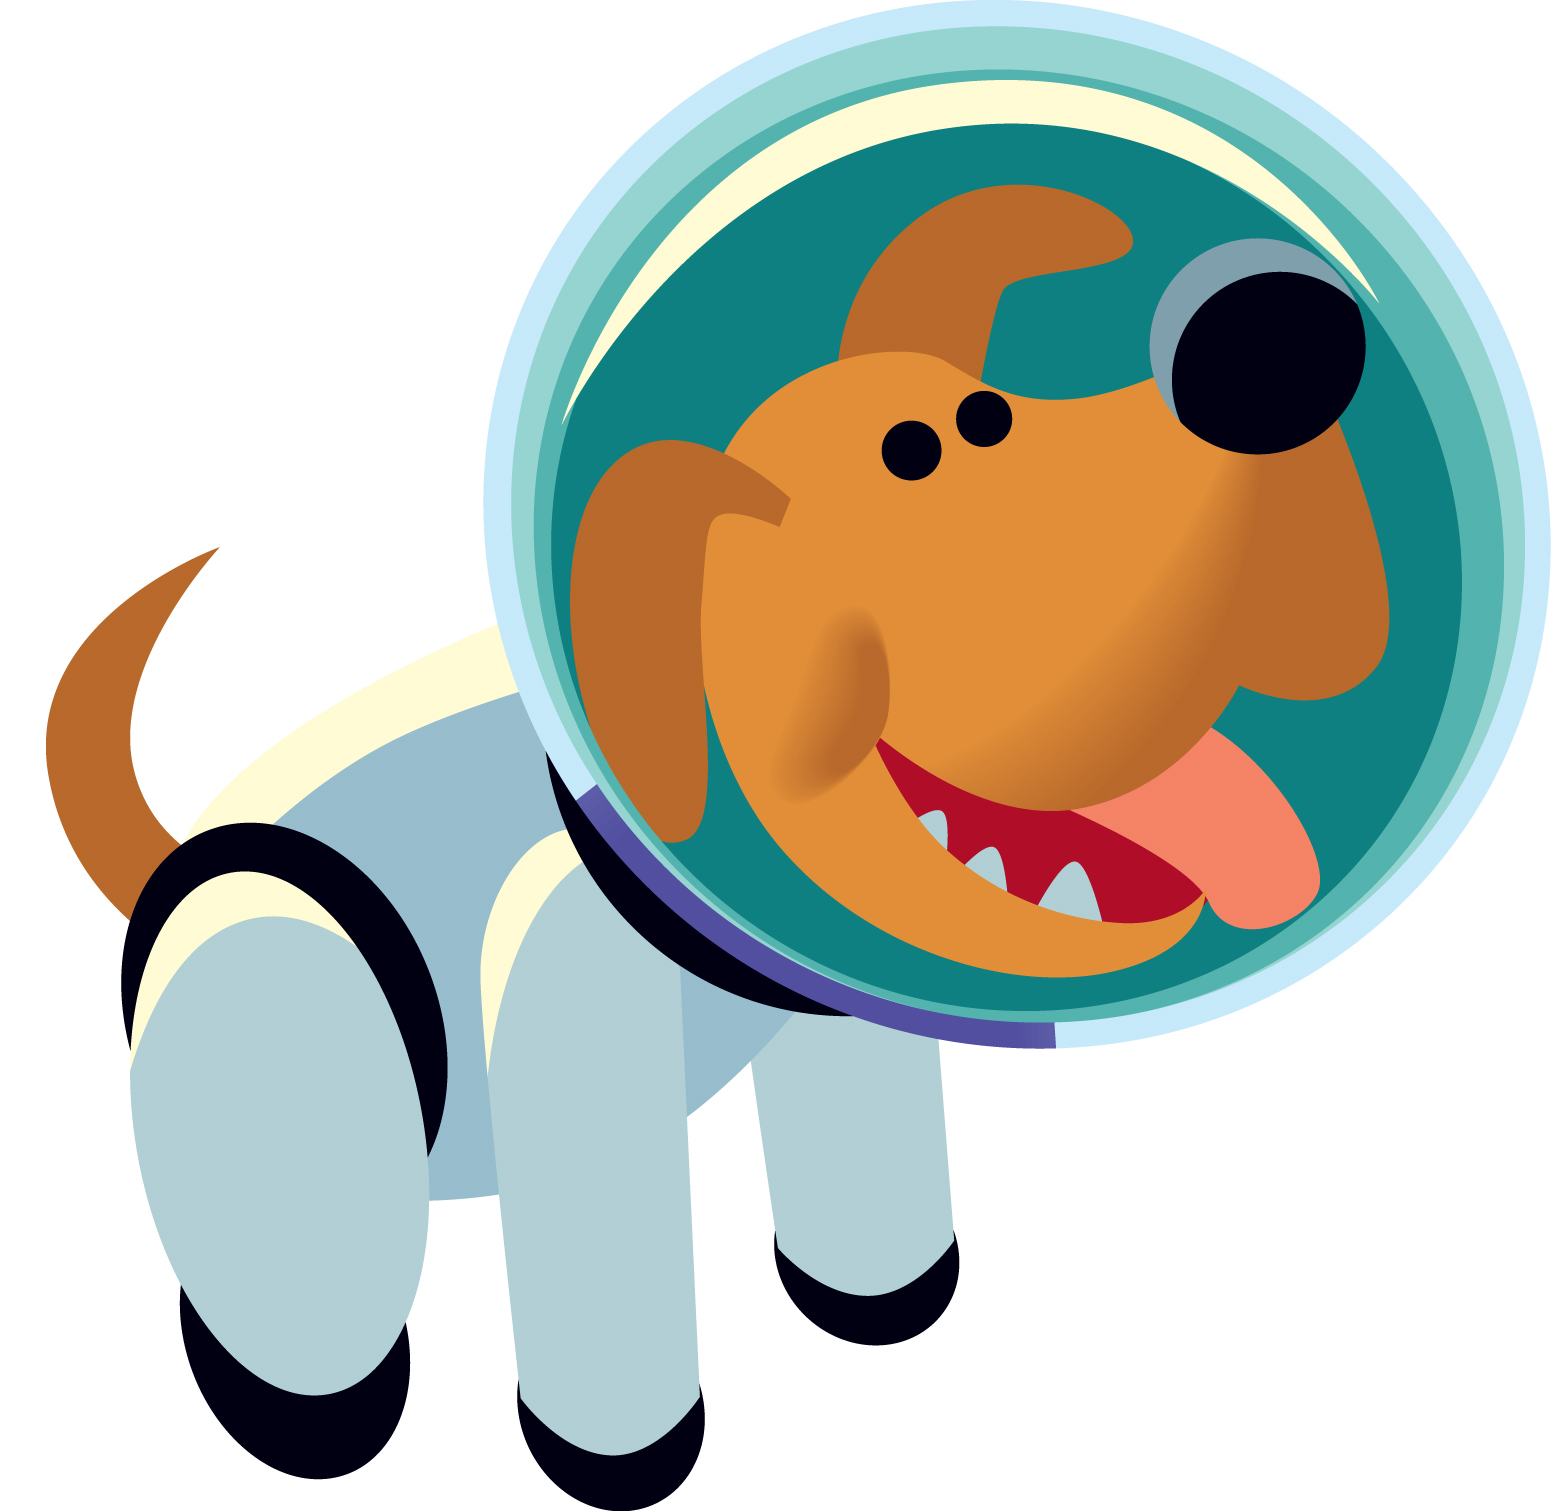 space travel clipart - photo #25